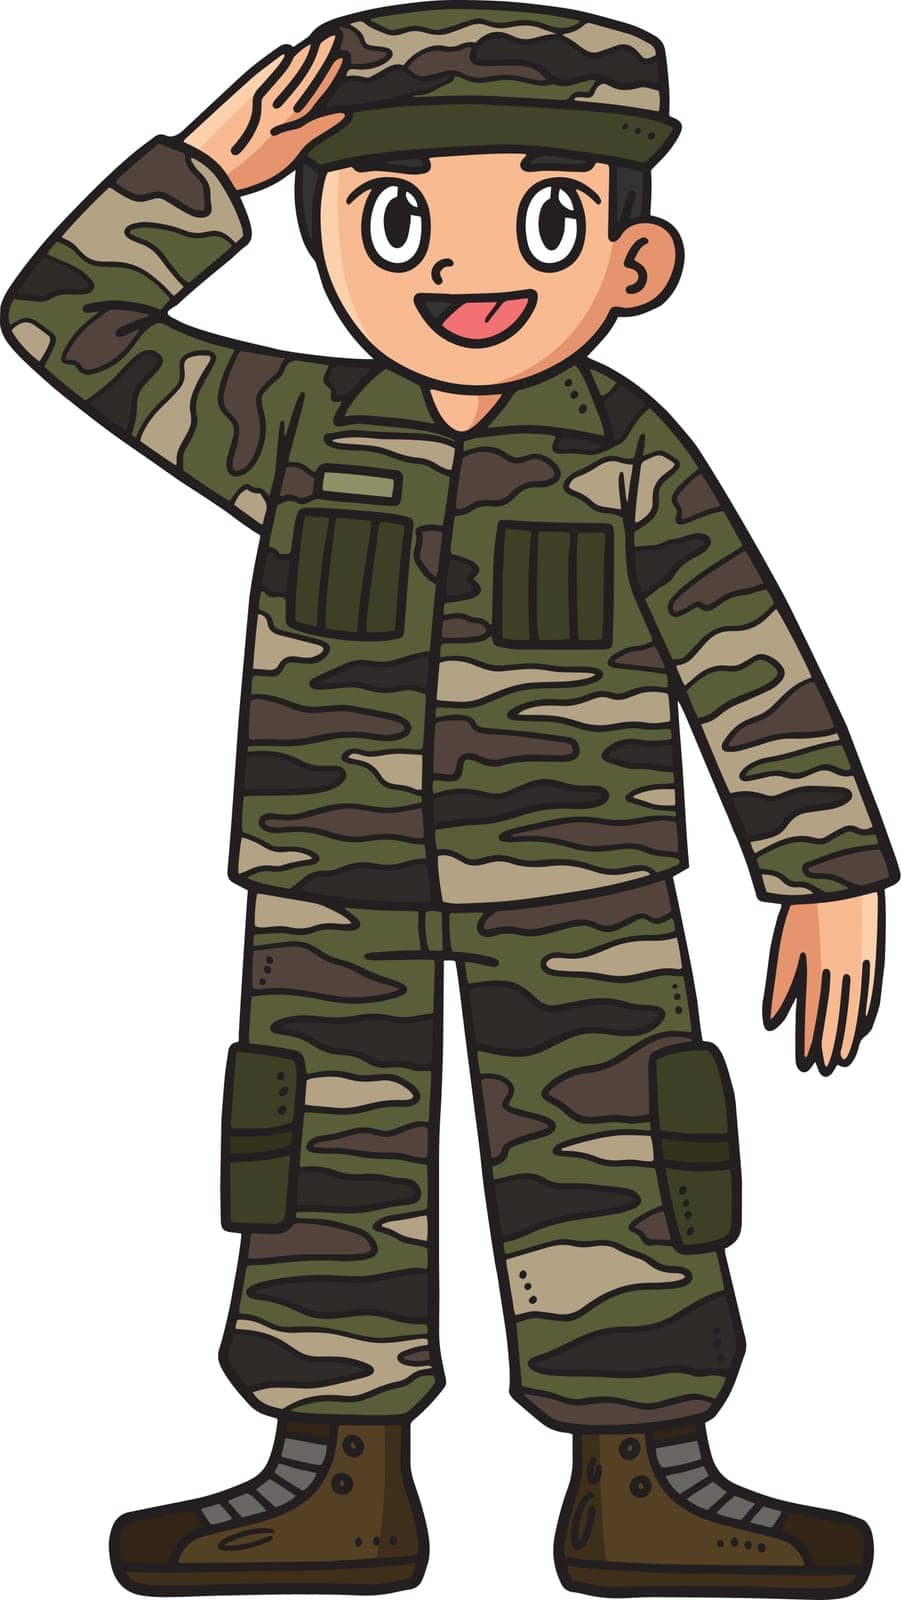 Saluting Soldier Cartoon Colored Clipart by abbydesign